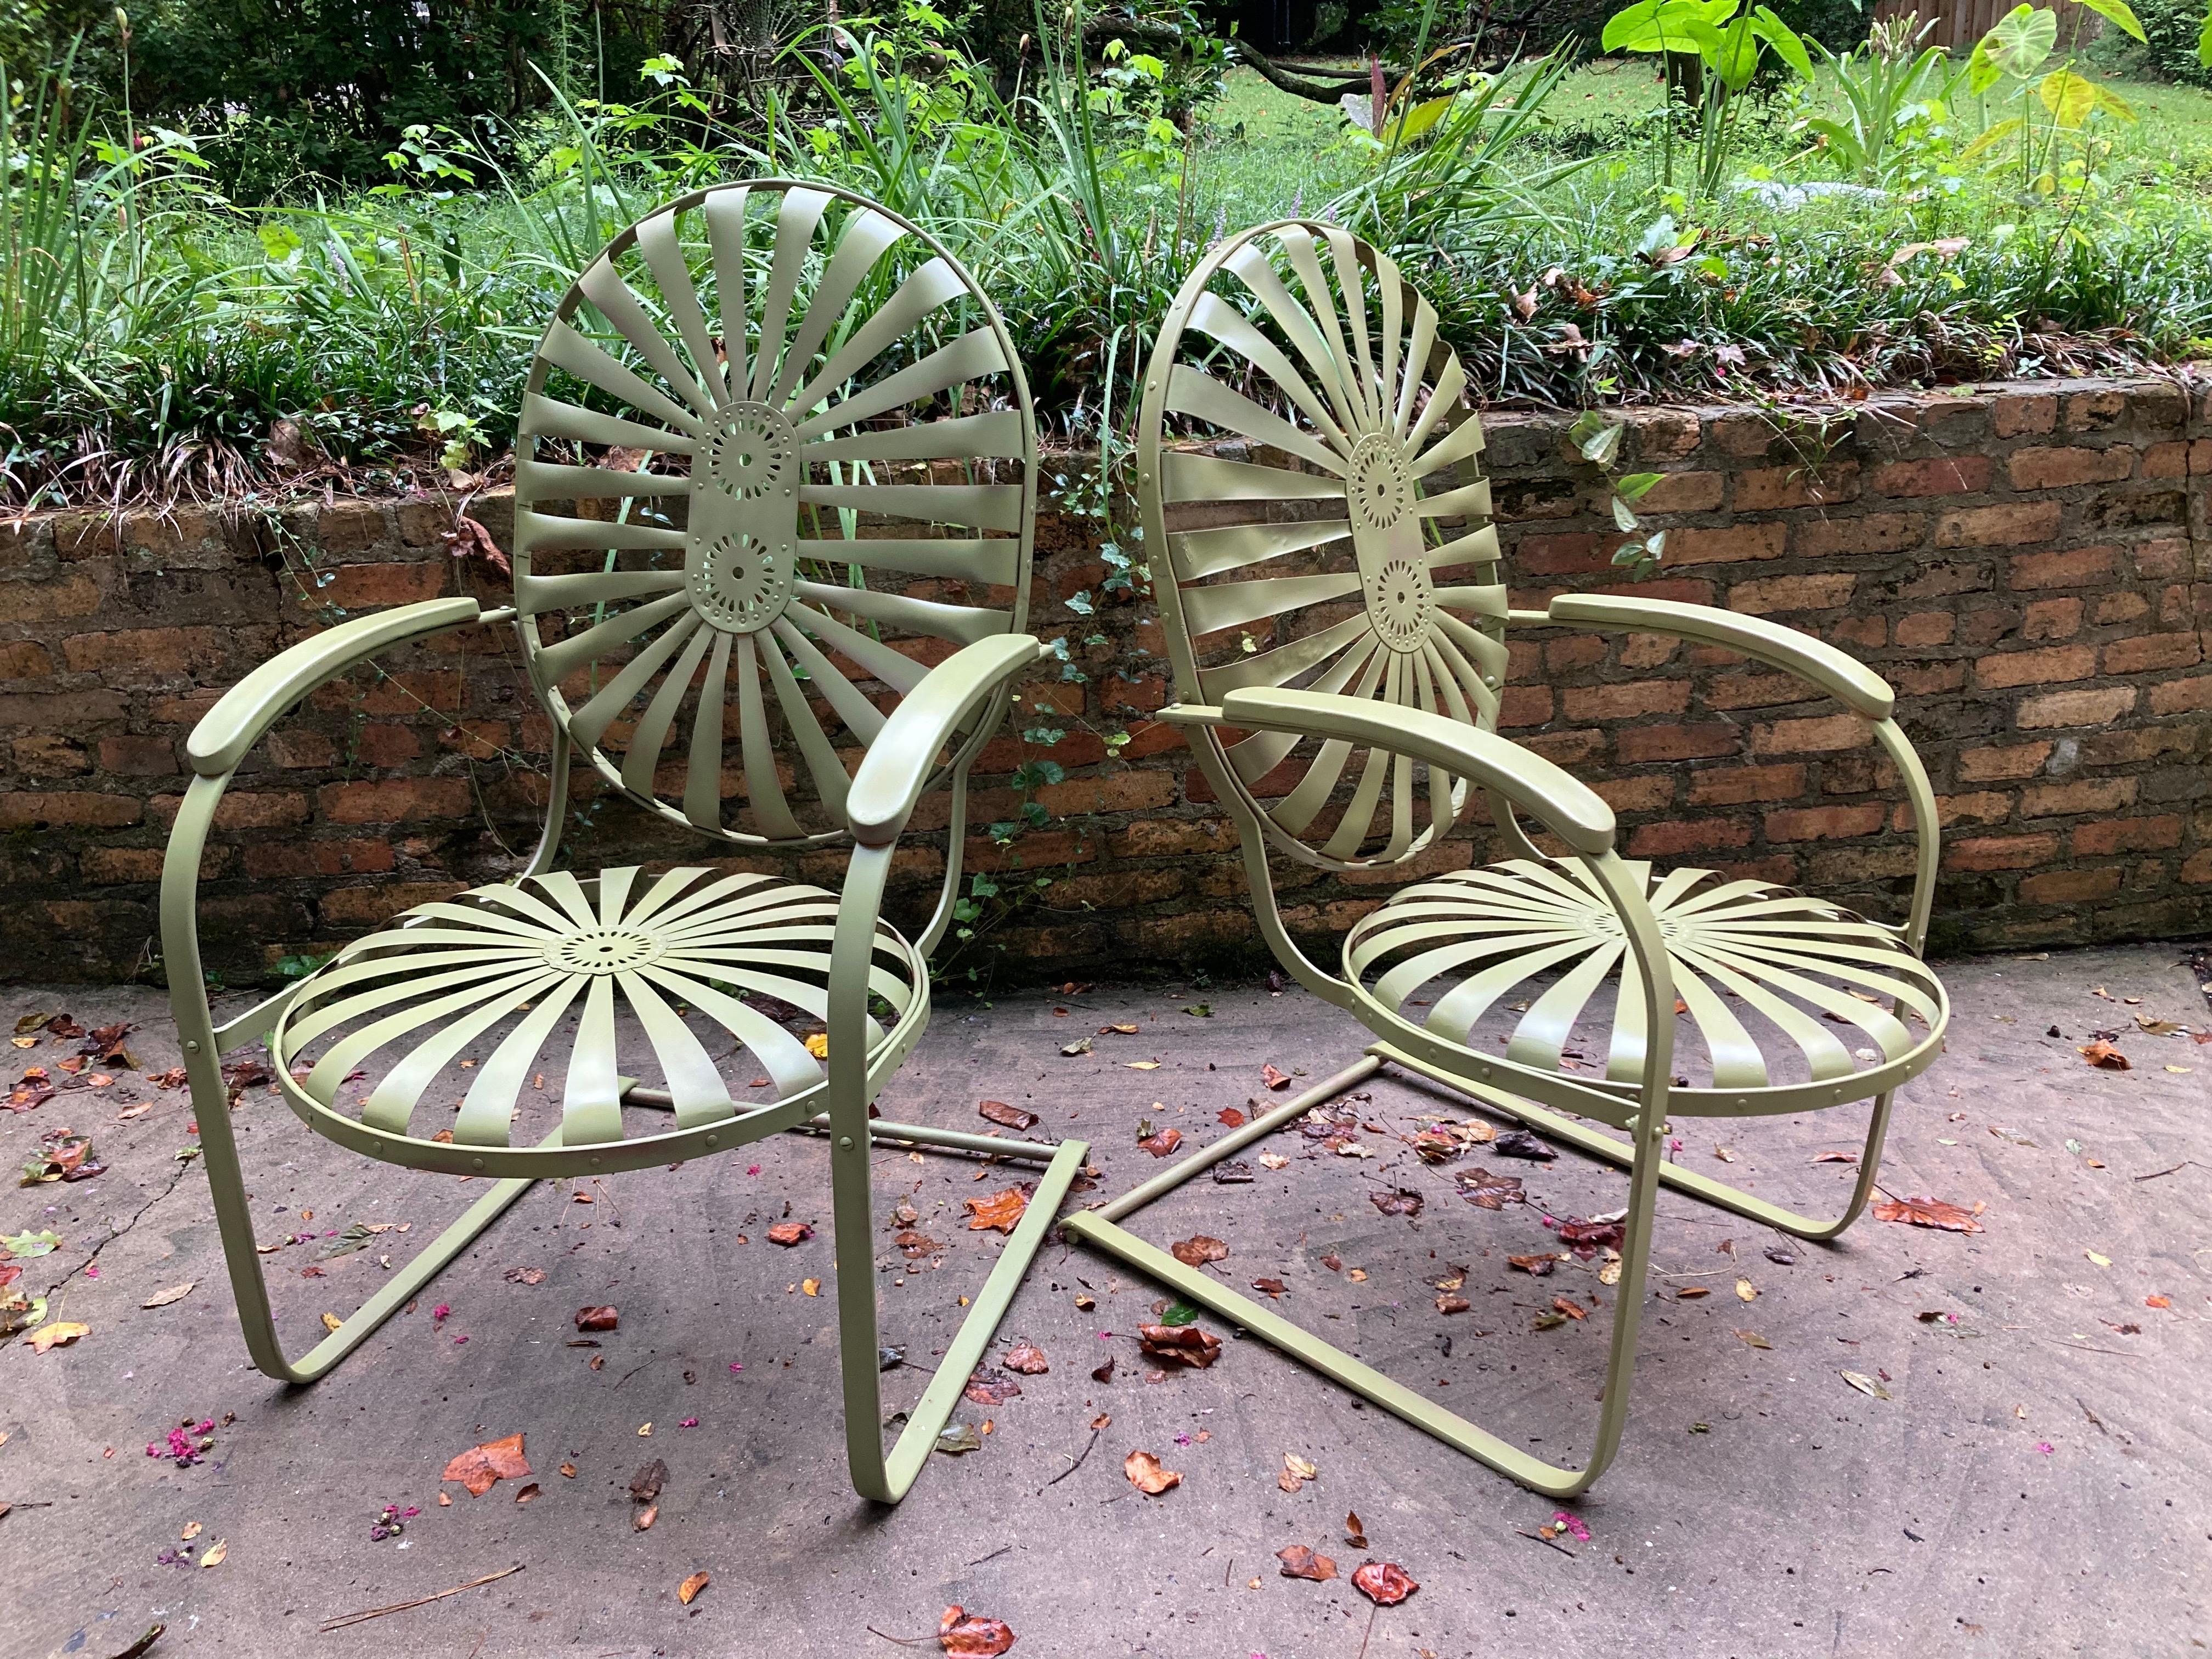 francois carre cantilever garden rocking chair

c.1930’s French art deco wrought iron & spring steel chairs by Francois Carre.

measure 25” wide, 41” tall, with a 18” seat height of and a depth of 26”.


****garden chair with rocking cantilevered